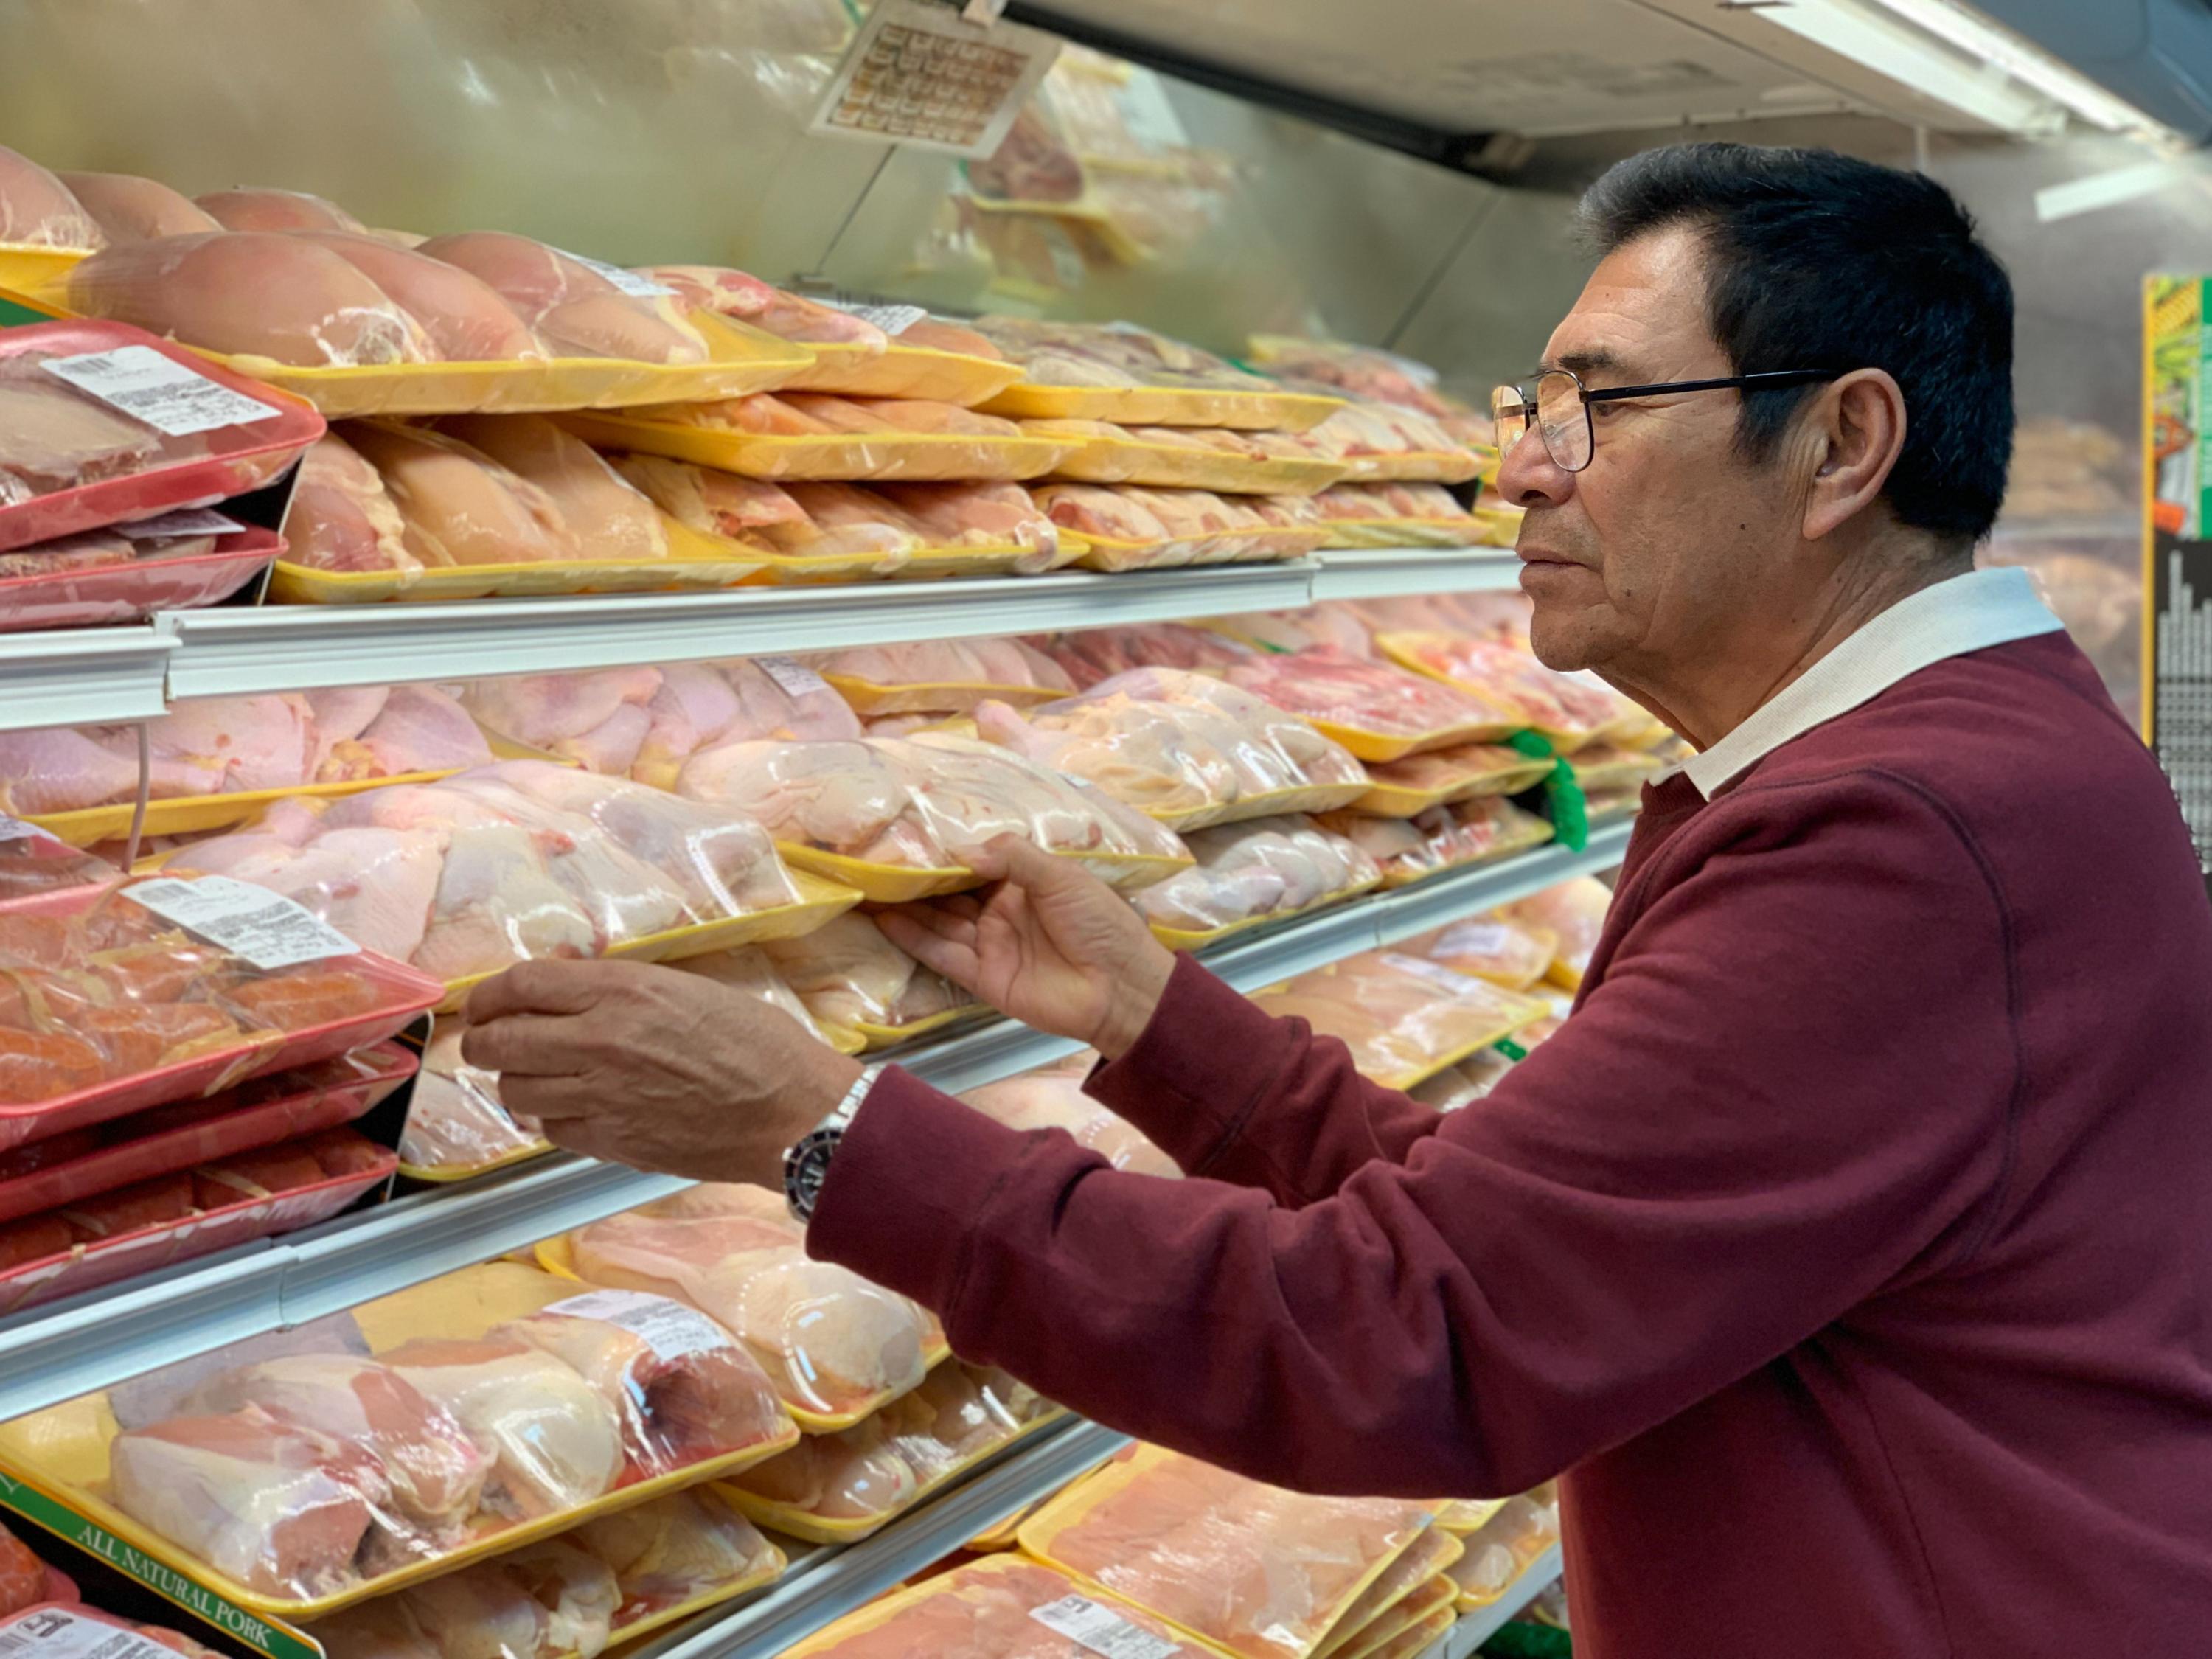 The Center for Scalable and Intelligent Automation in Poultry Processing, established by a $5 million USDA-NIFA grant, aims to adapt robotic automation to the poultry processing industry.